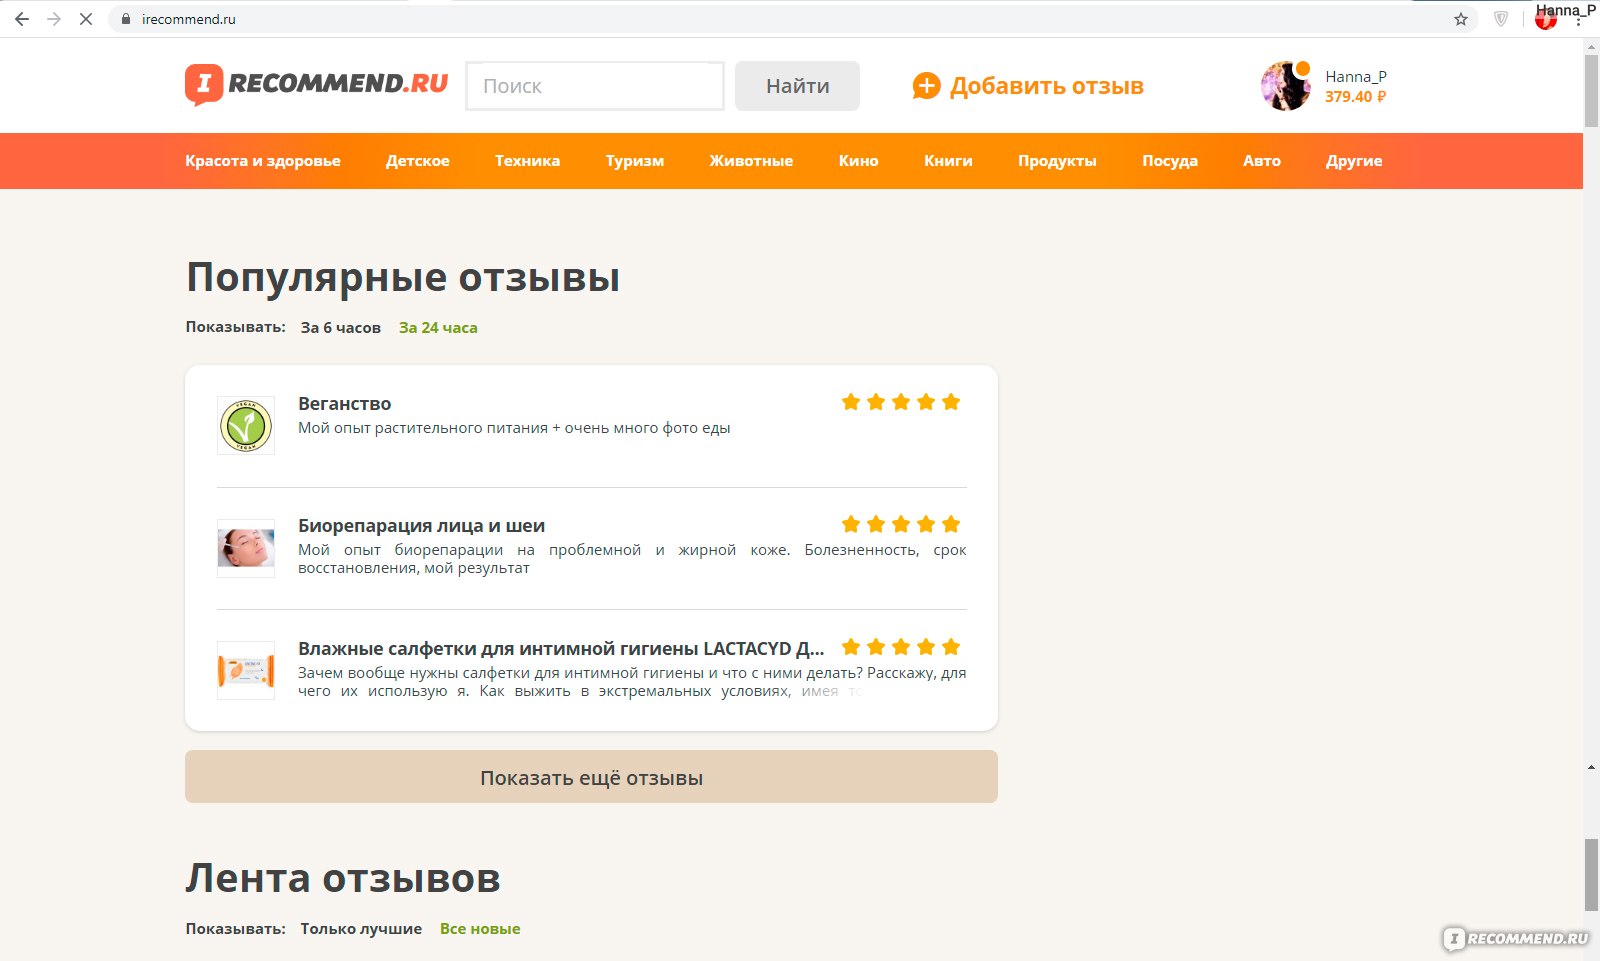 Irecommend ru content. Irecommend заработок. Ирекоменд ру заработок. Recommend.ru.